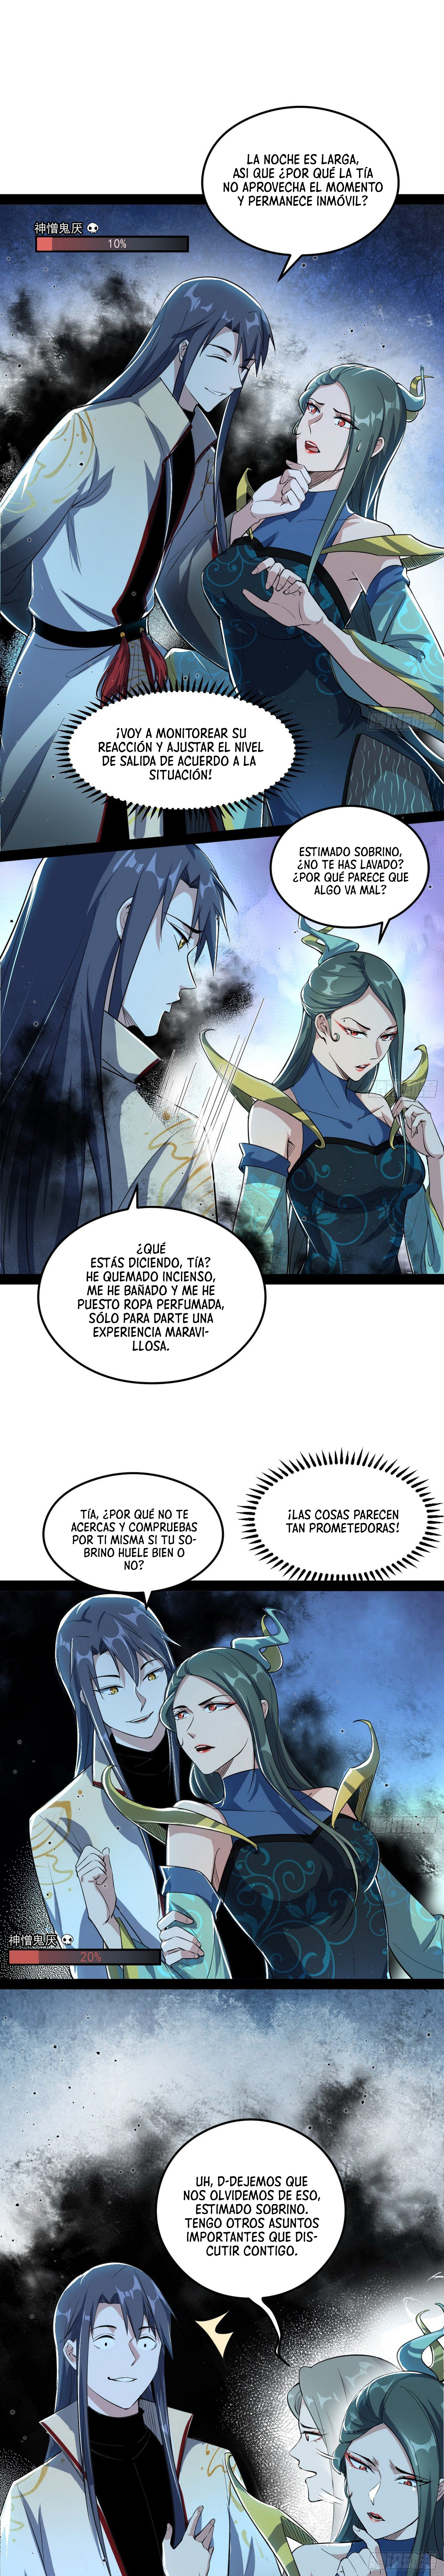 Manga Soy un dios maligno Chapter 101 image number 12